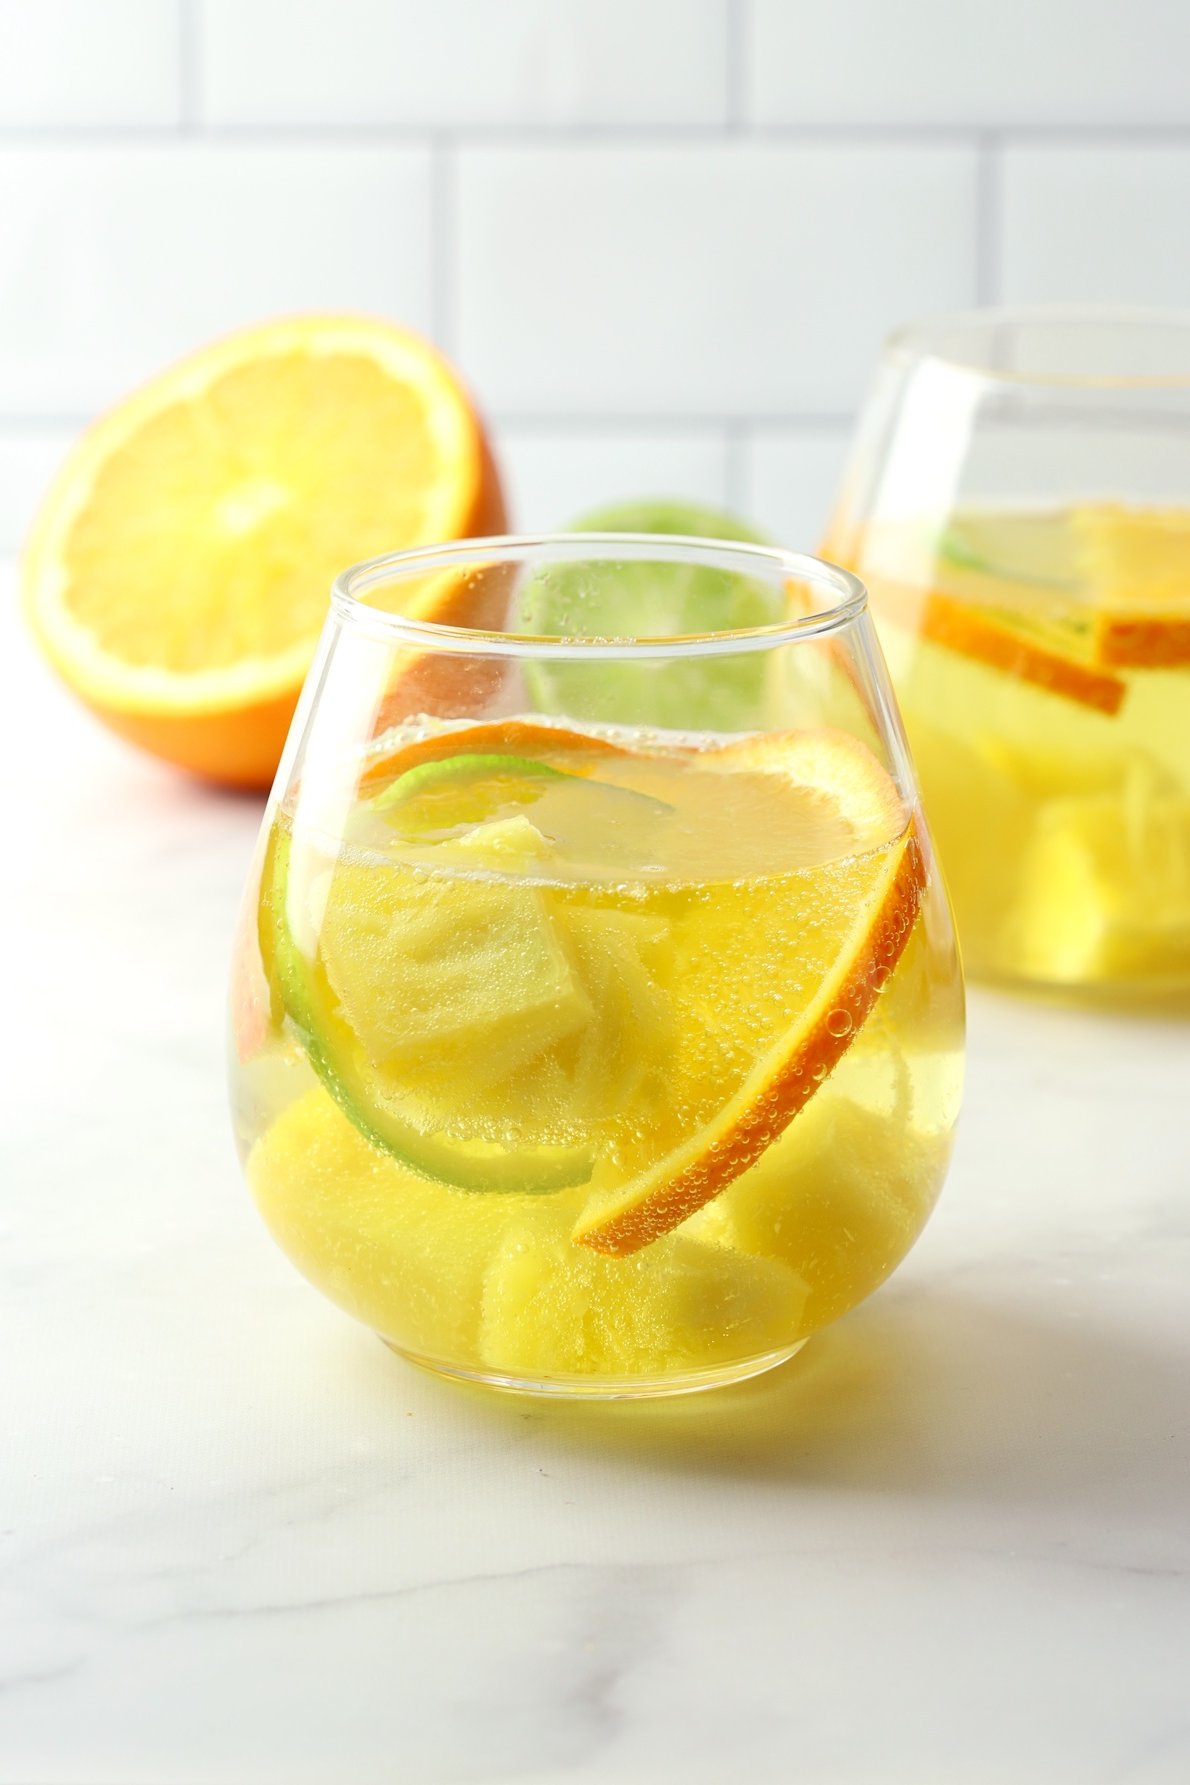 A wine glass filled with white wine sangria.